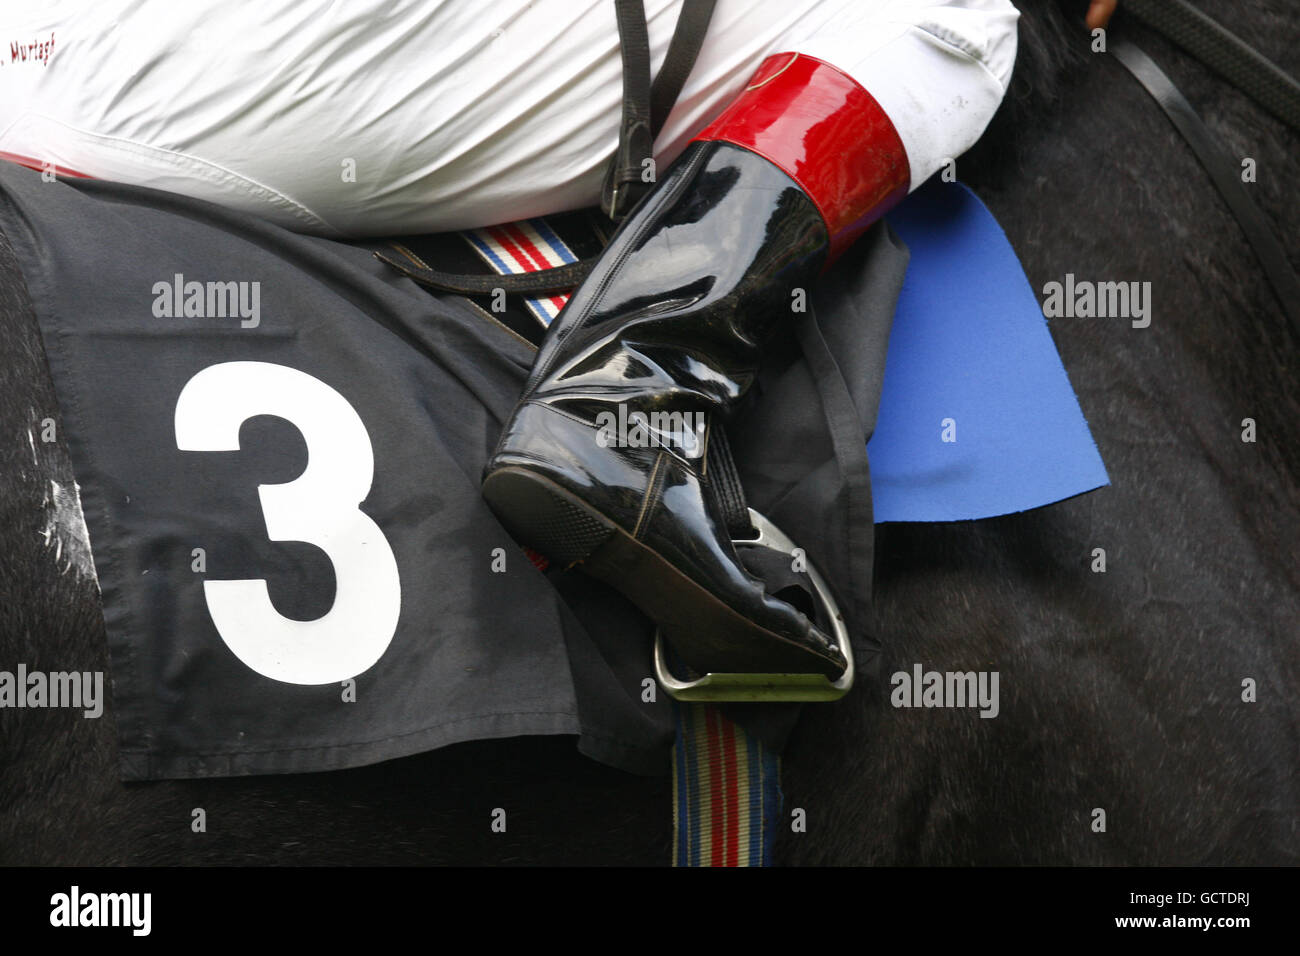 Detail of a jockey's boots and race number on the saddlecloth of his ride Stock Photo